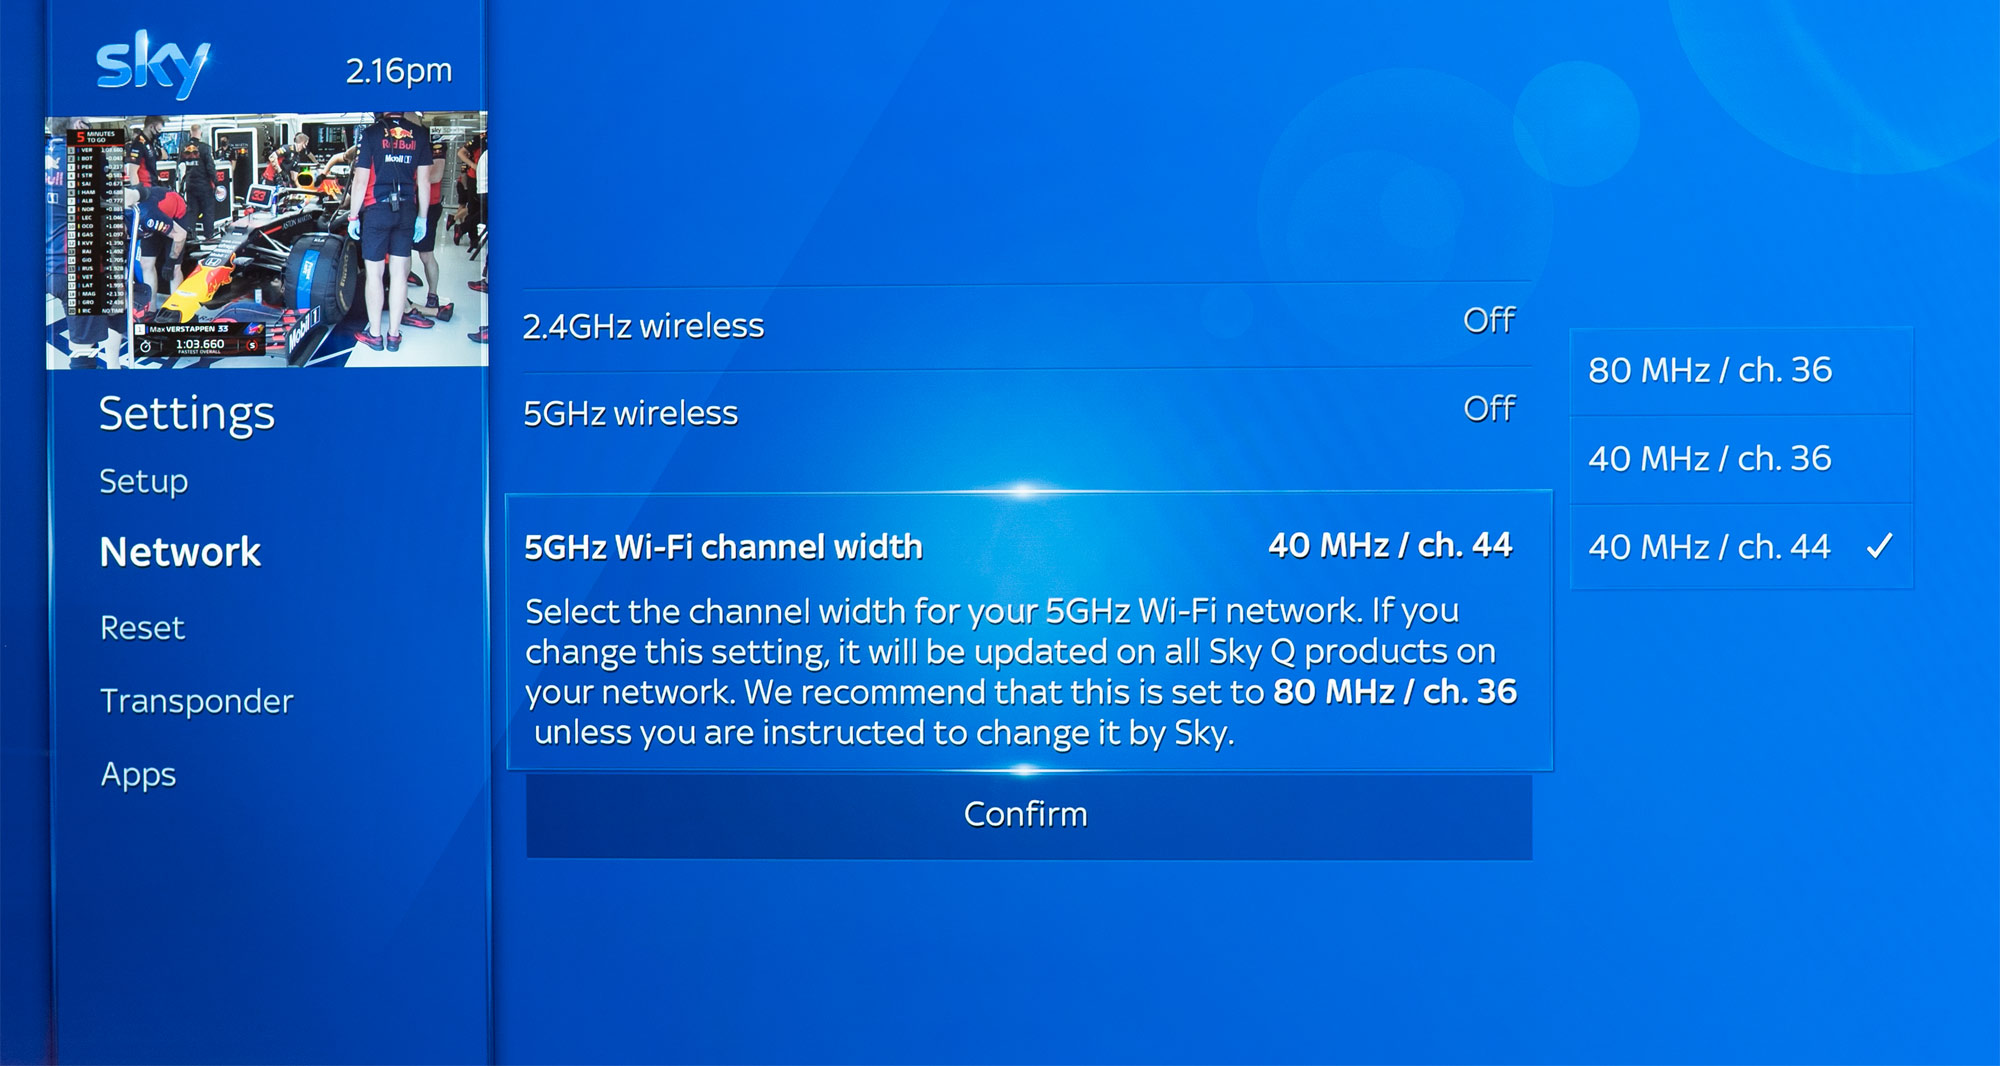 How To Disable Wi Fi With Sky Q And Use Ethernet Instead